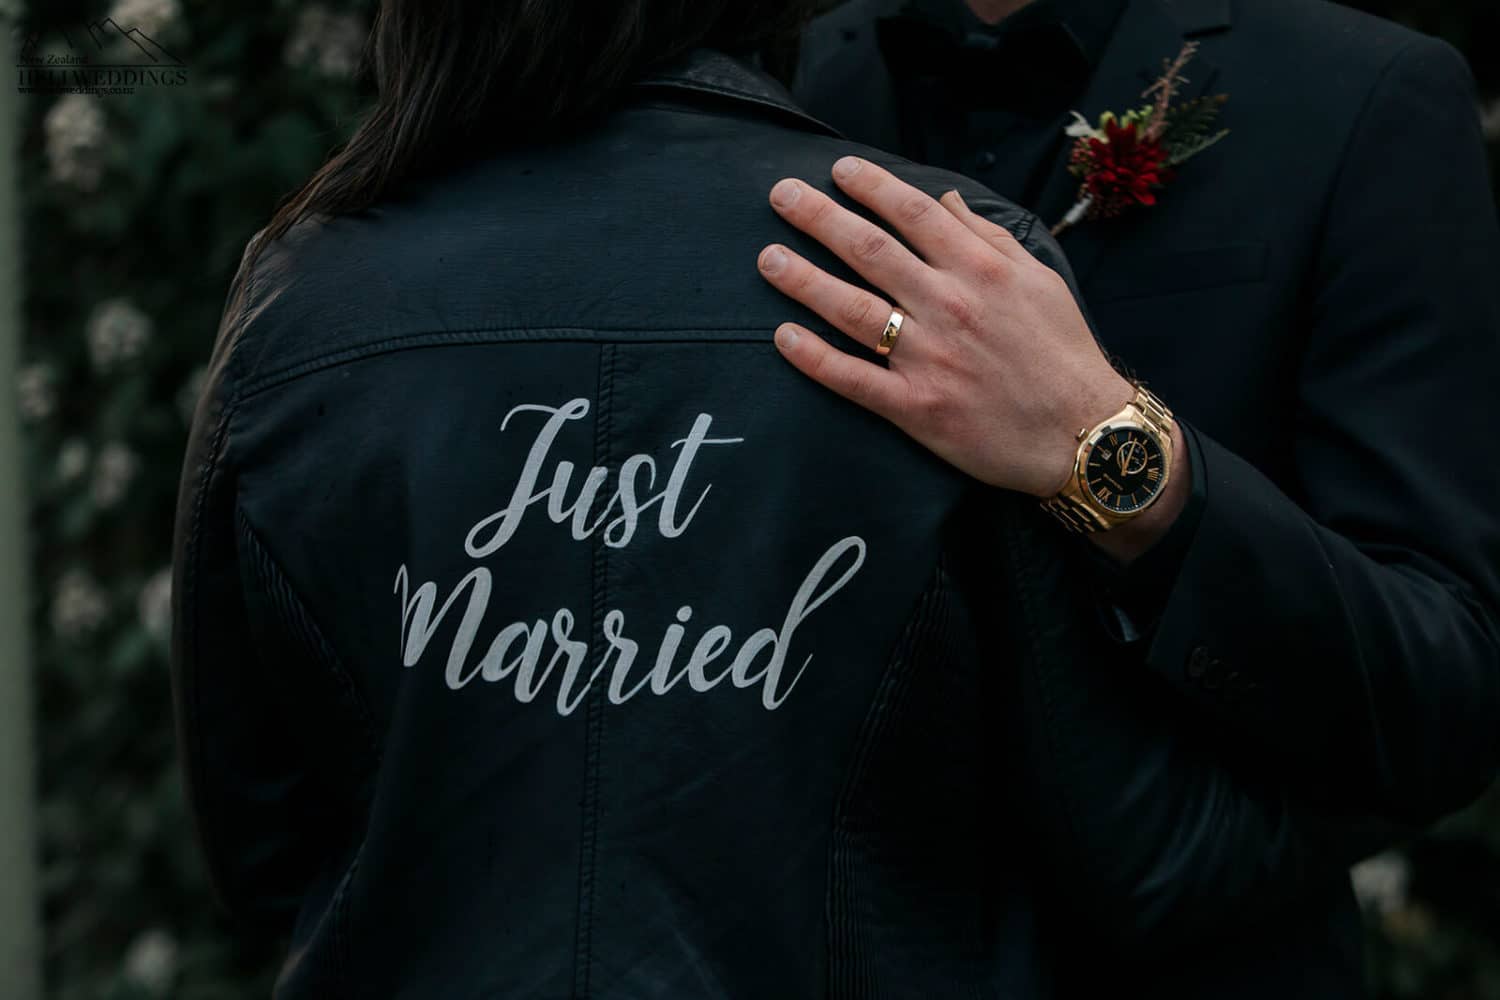 Just Married jacket